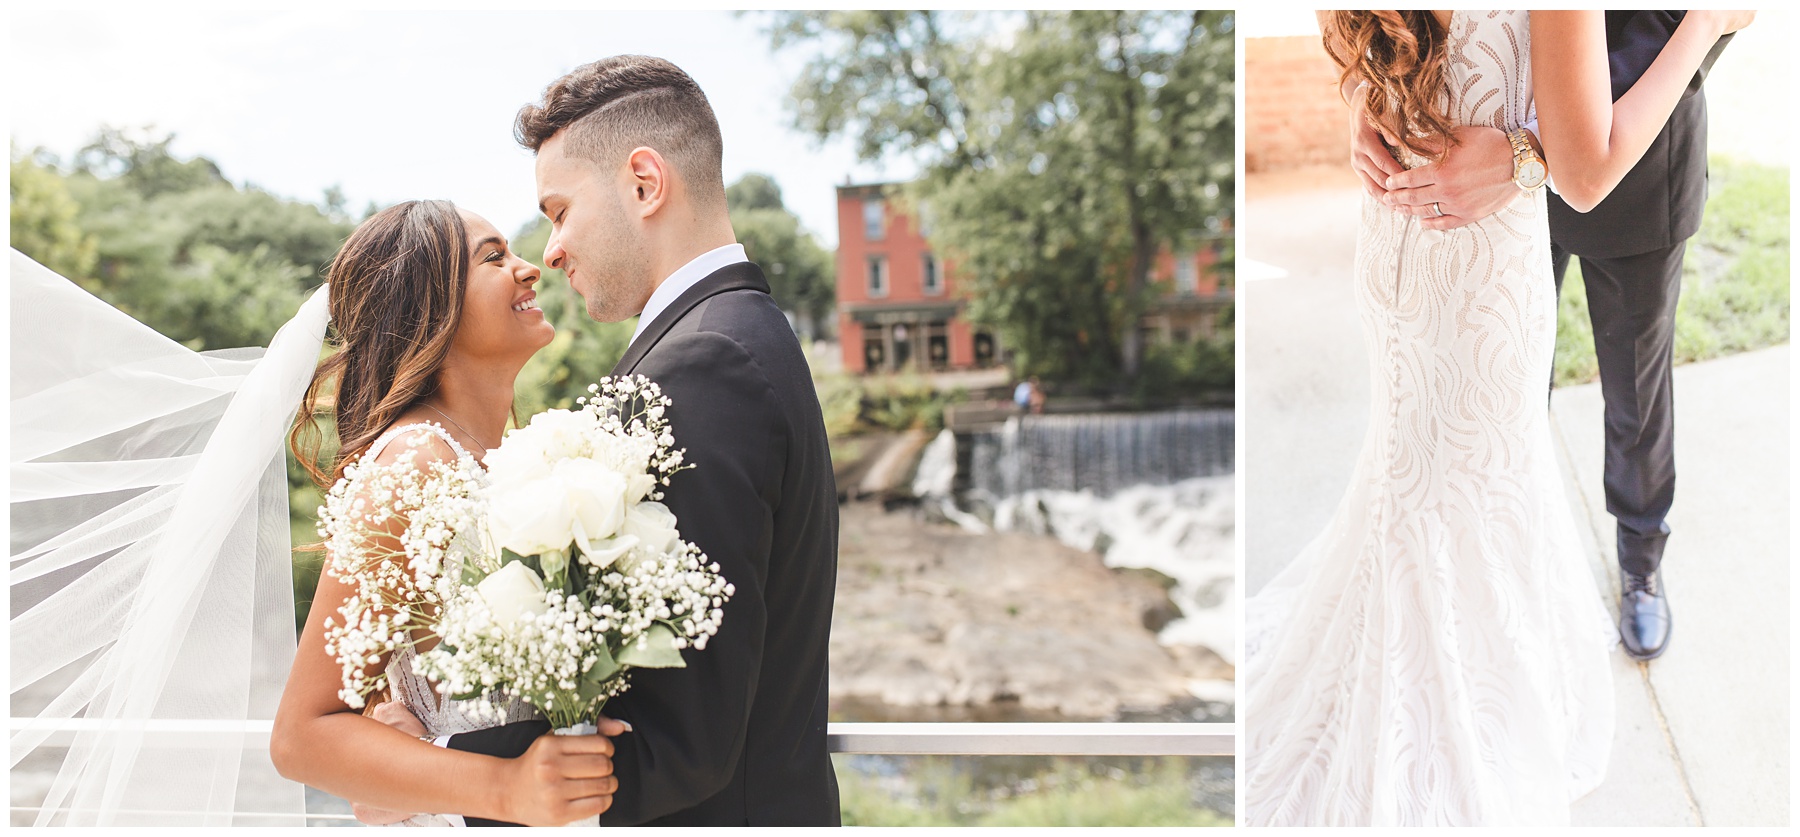 candid images of bride and groom in natural light gold and cream wedding